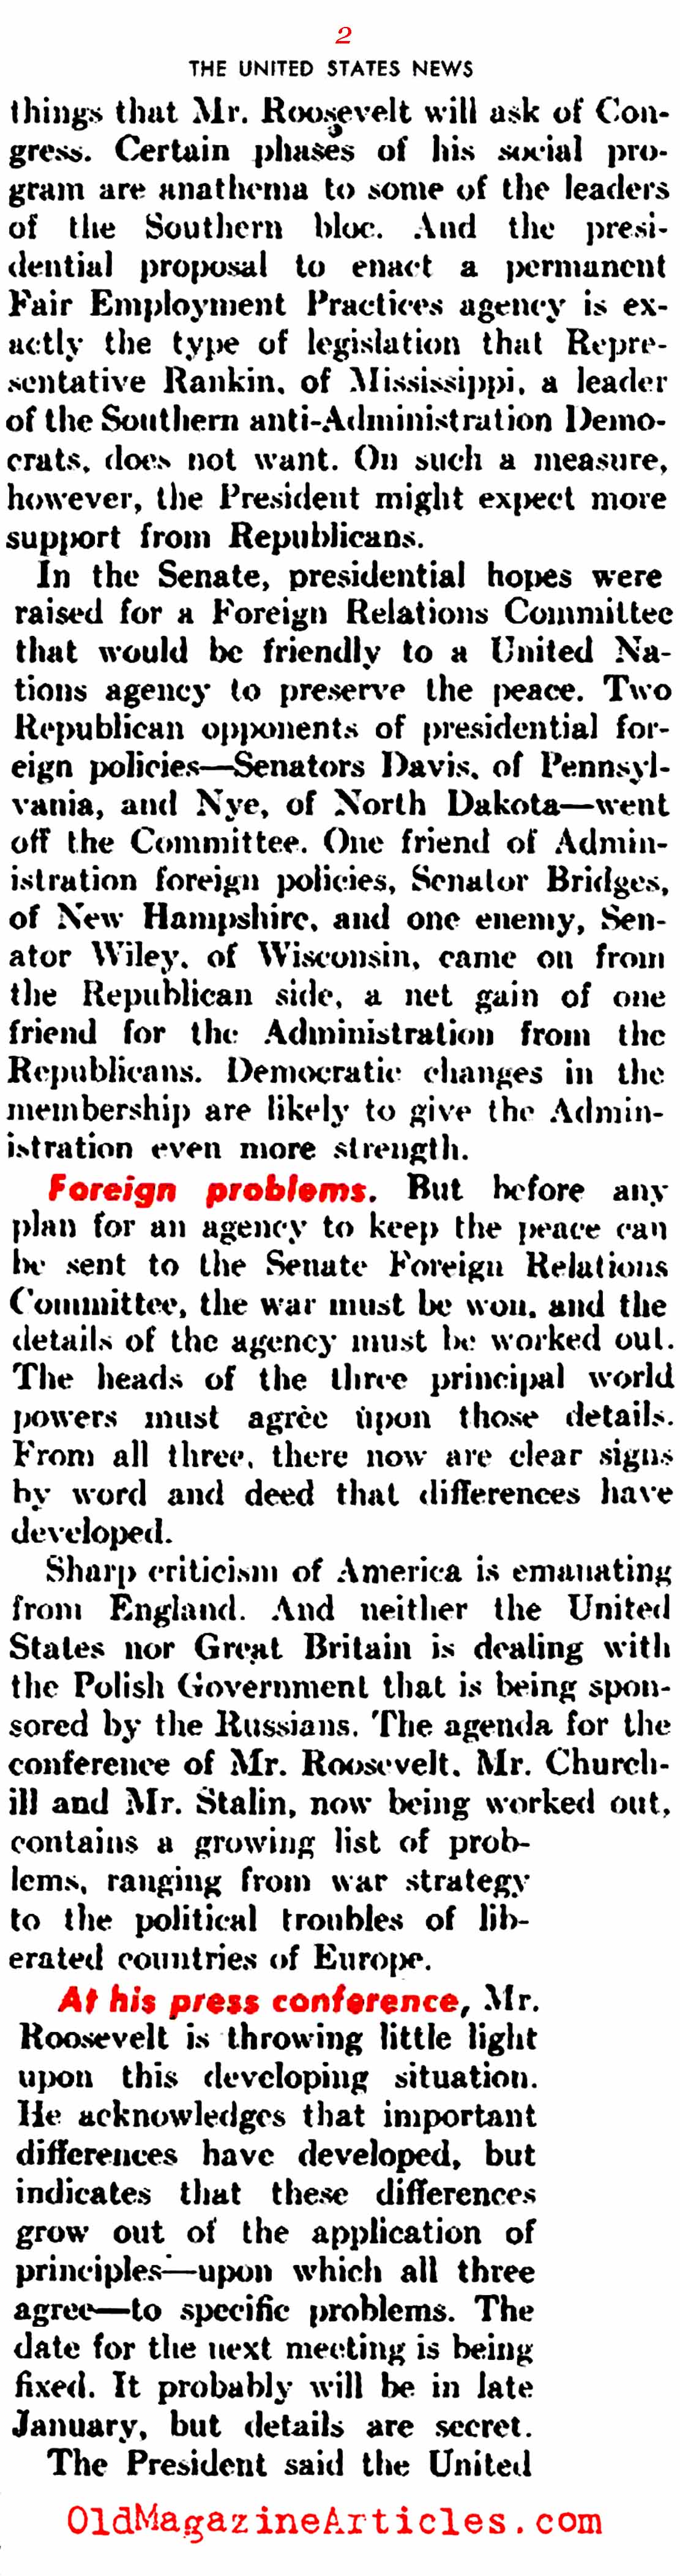 FDR and the House Republicans (United States News, 1944)